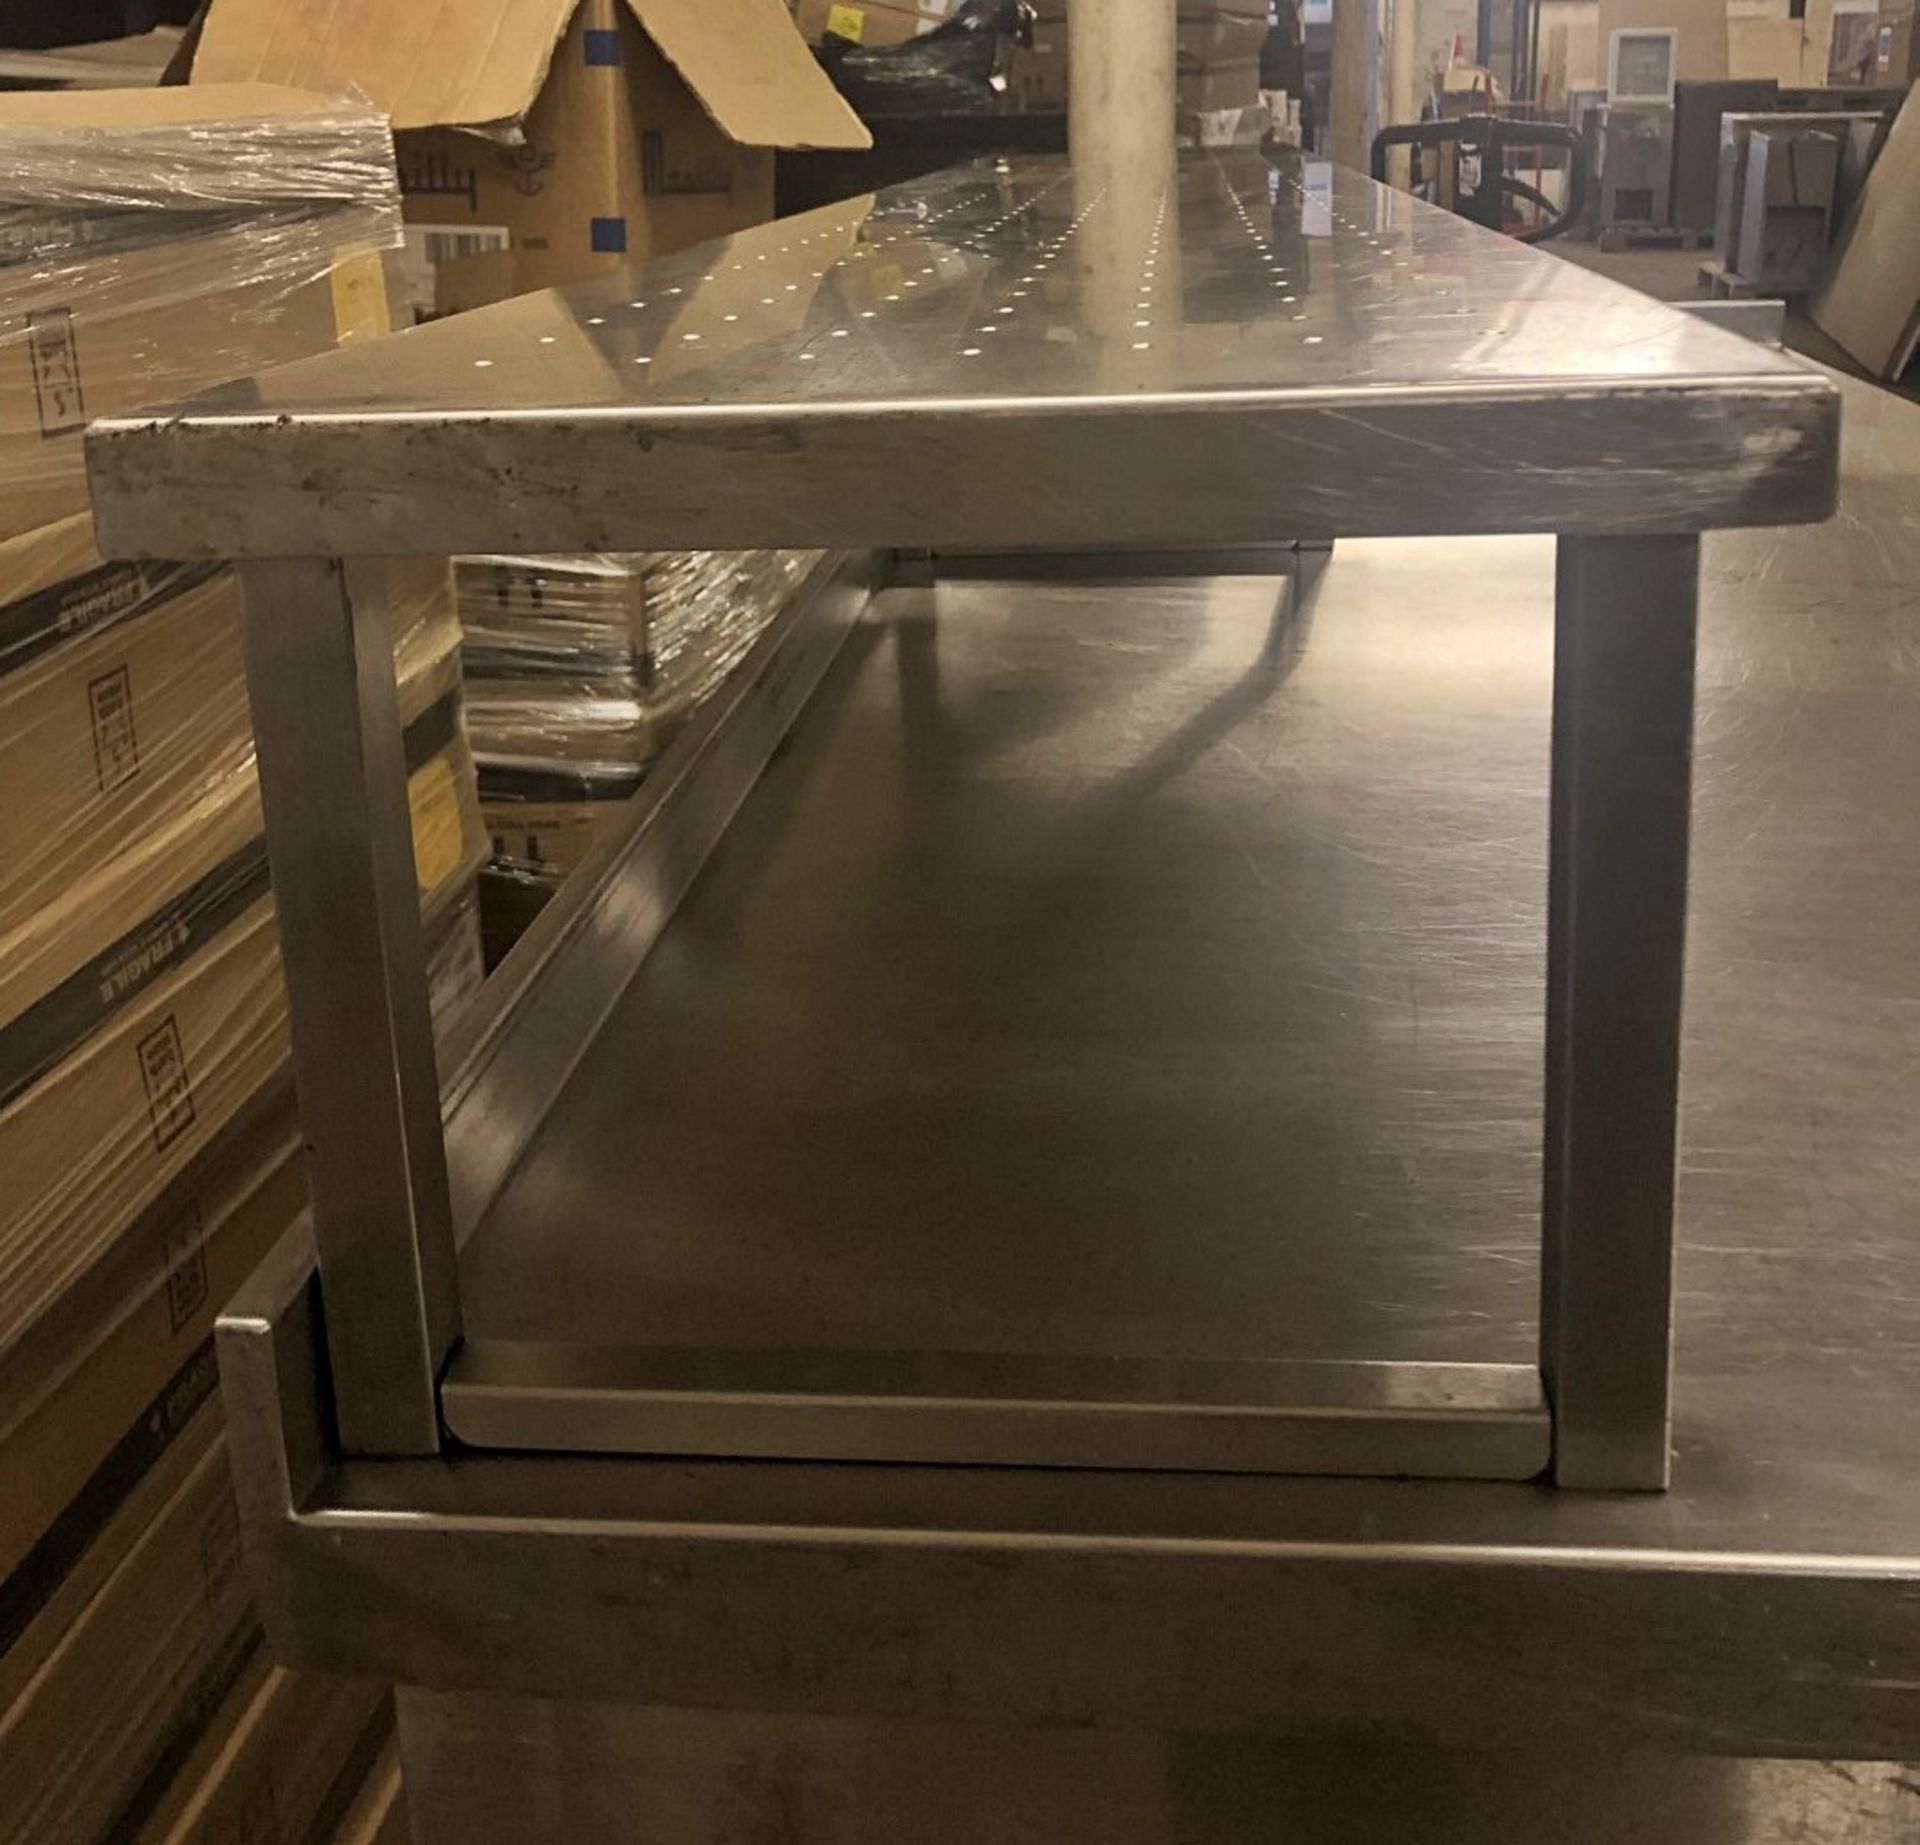 1 x Large Stainless Steel Table Unit - CL374 - NC265 - Location: Bolton BL1 - Image 5 of 6